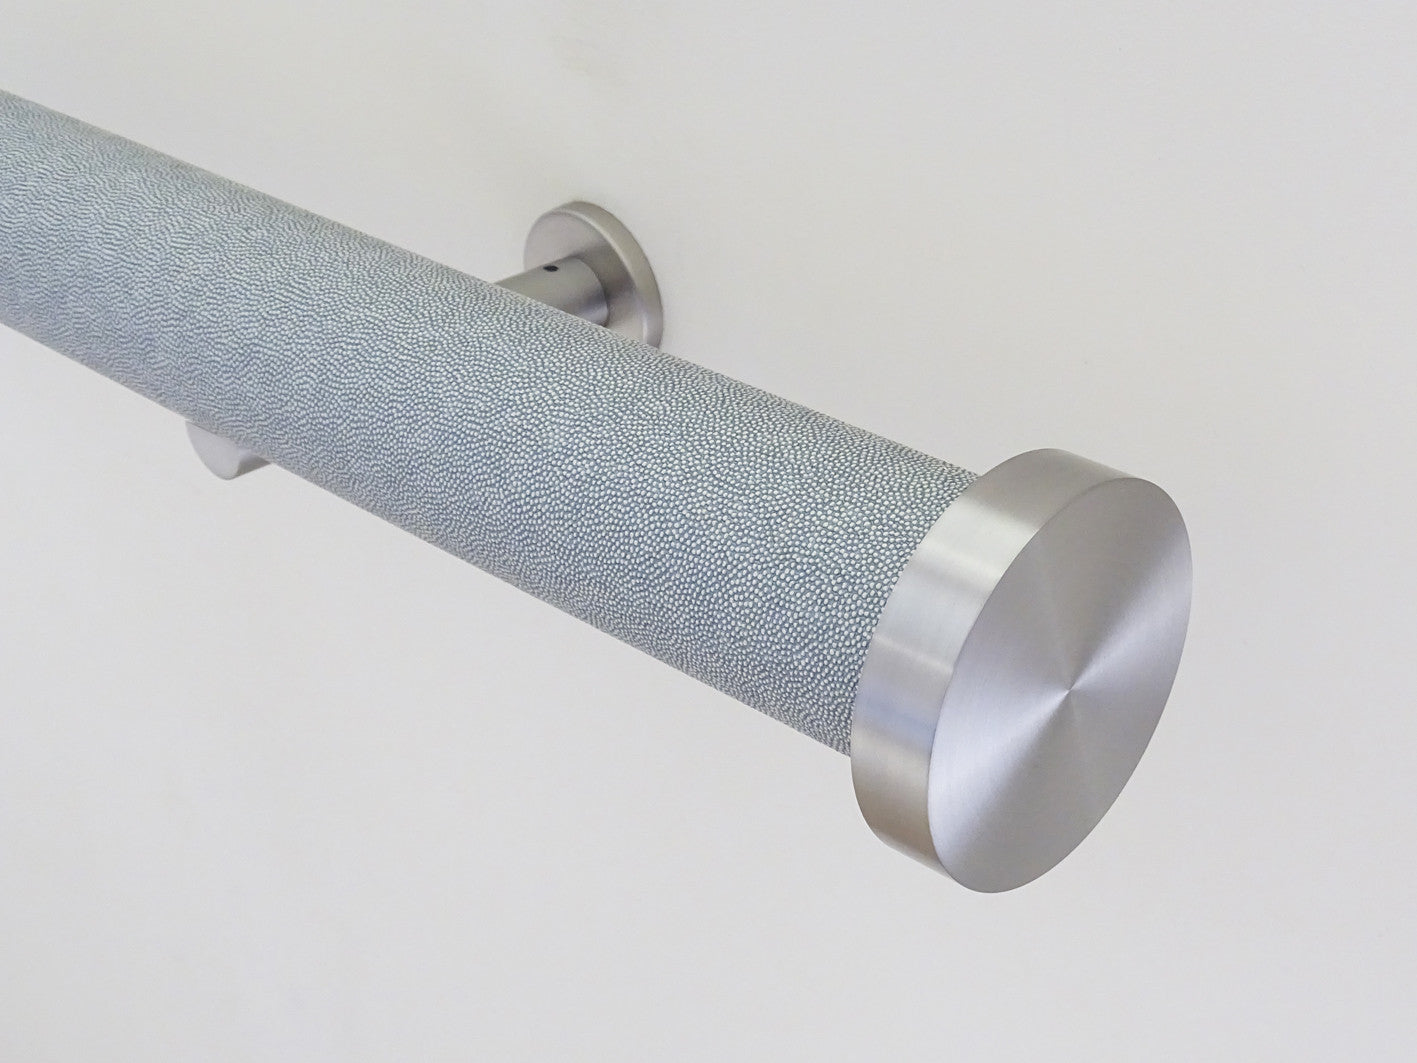 shagreen textured wrapped and tracked moonlight curtain pole by Walcot House